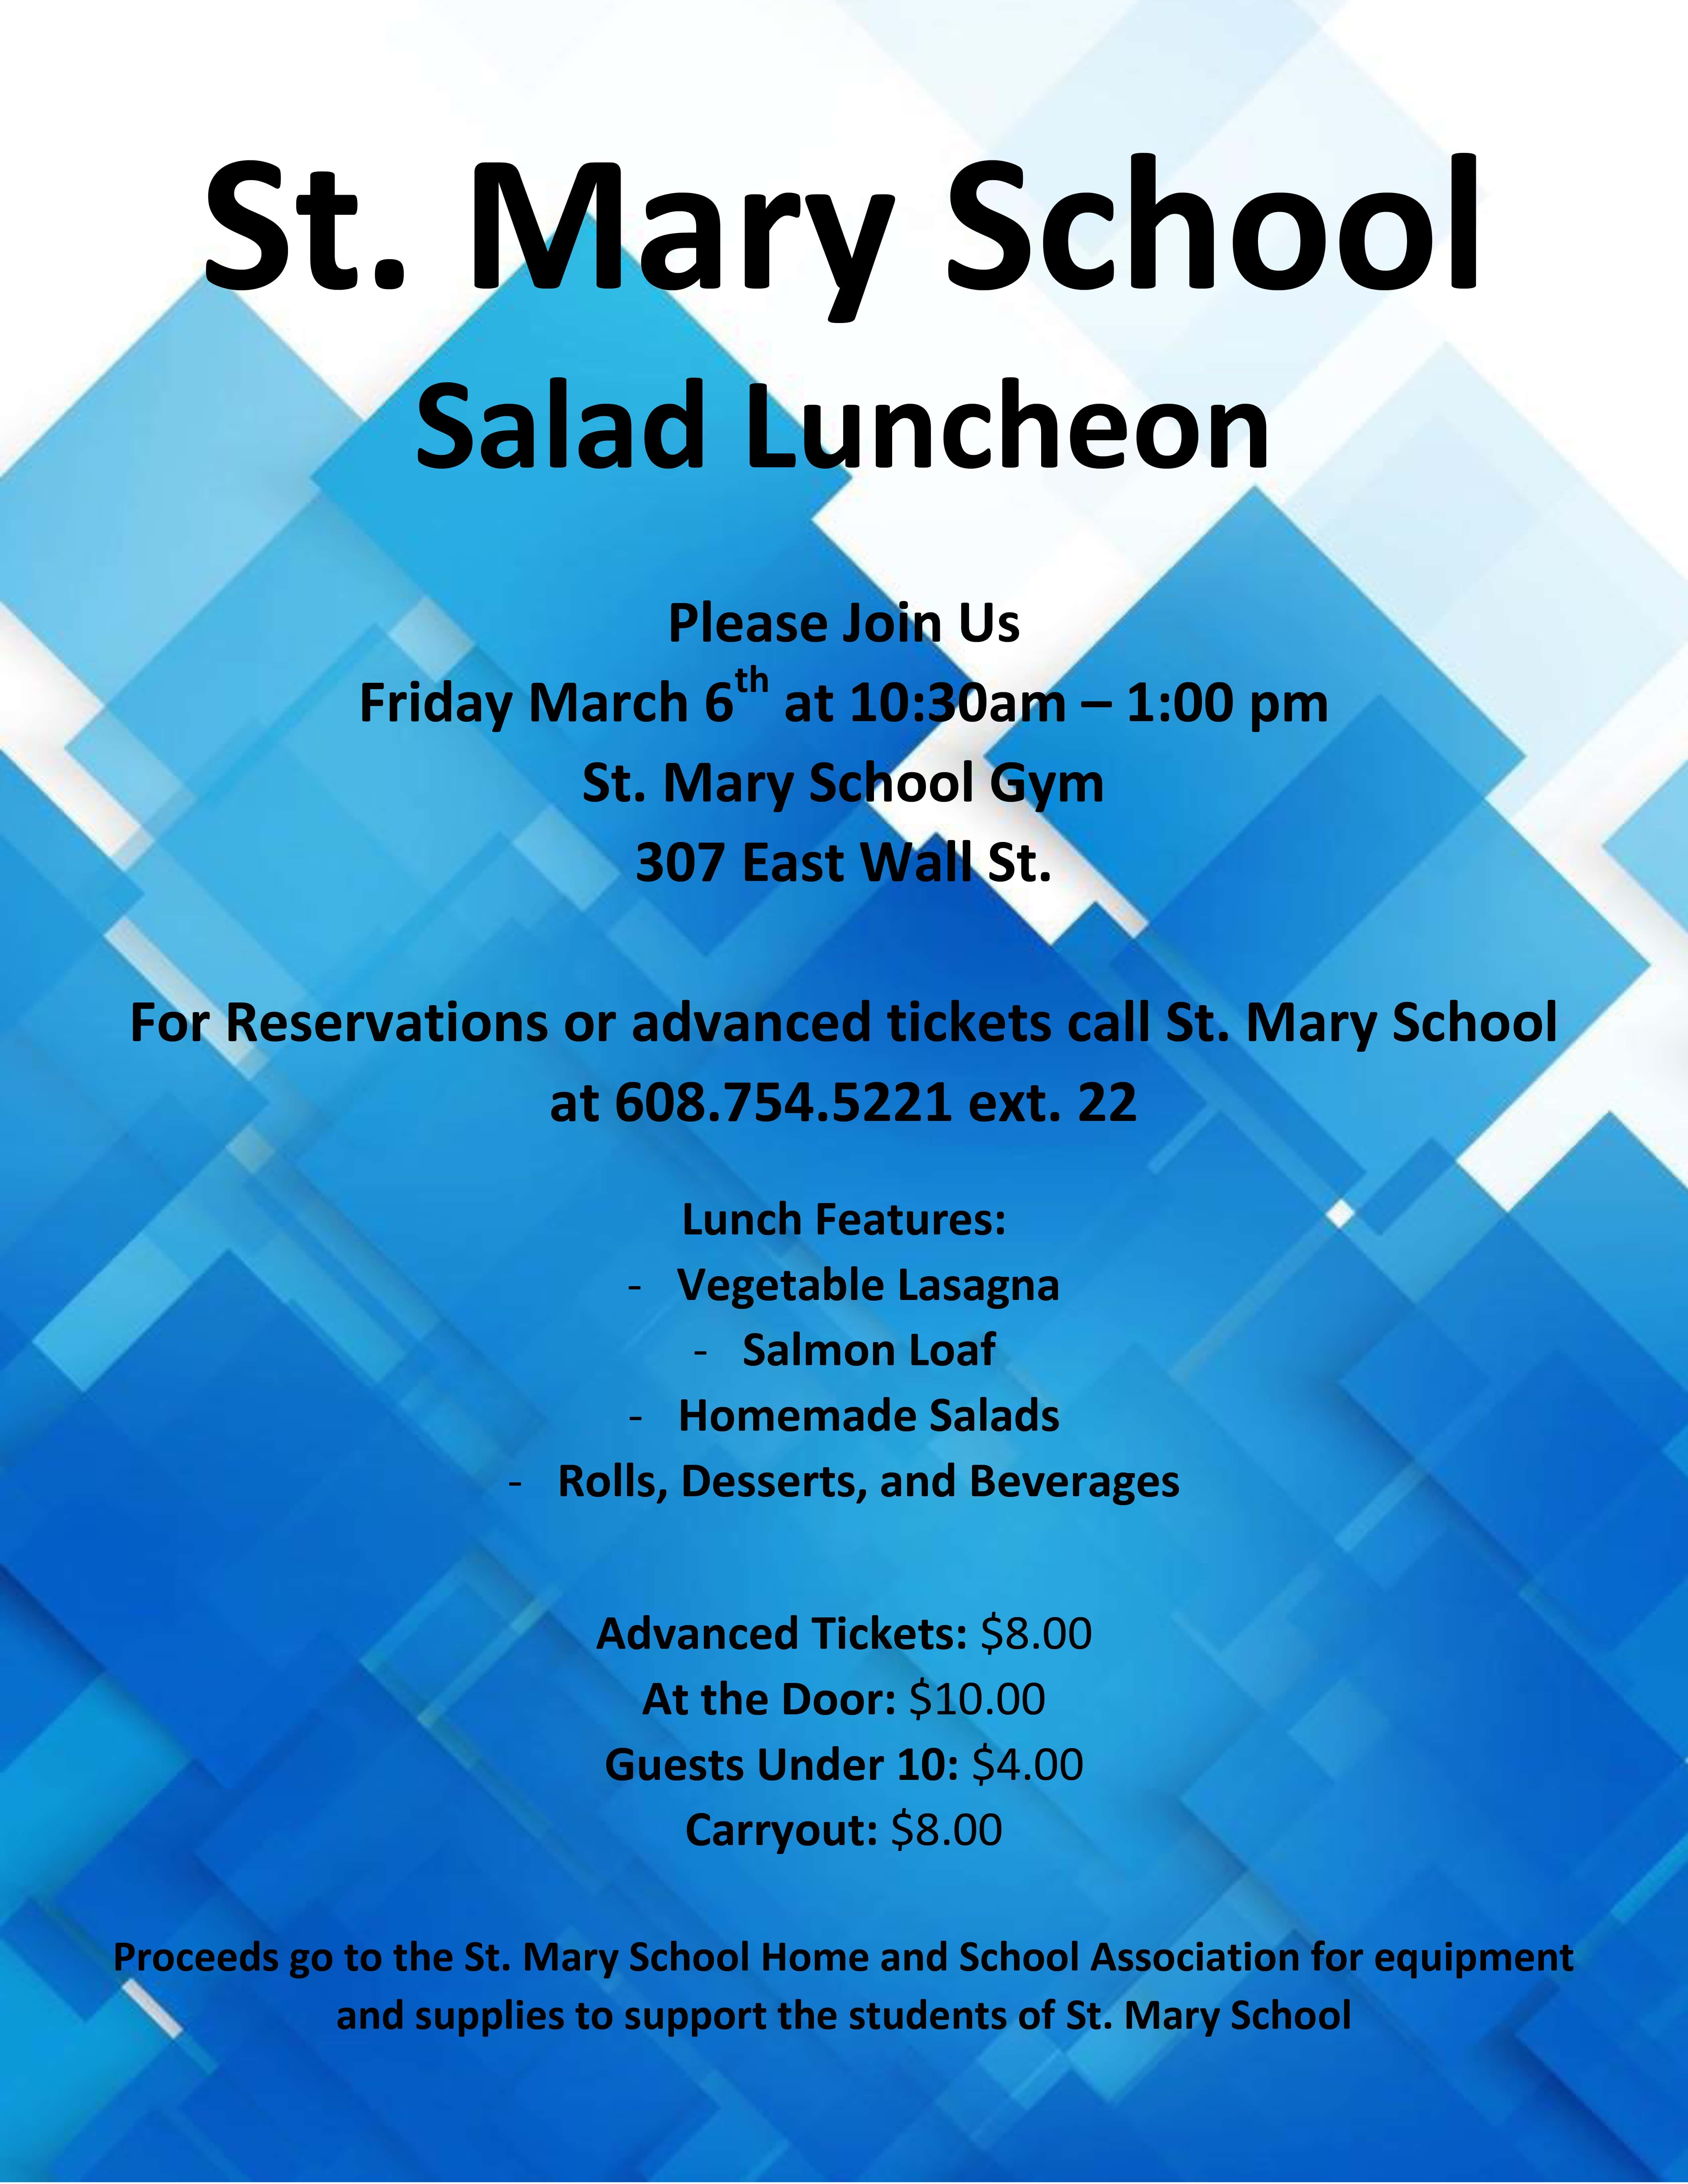 2020_salad-luncheon-poster3_0001-2